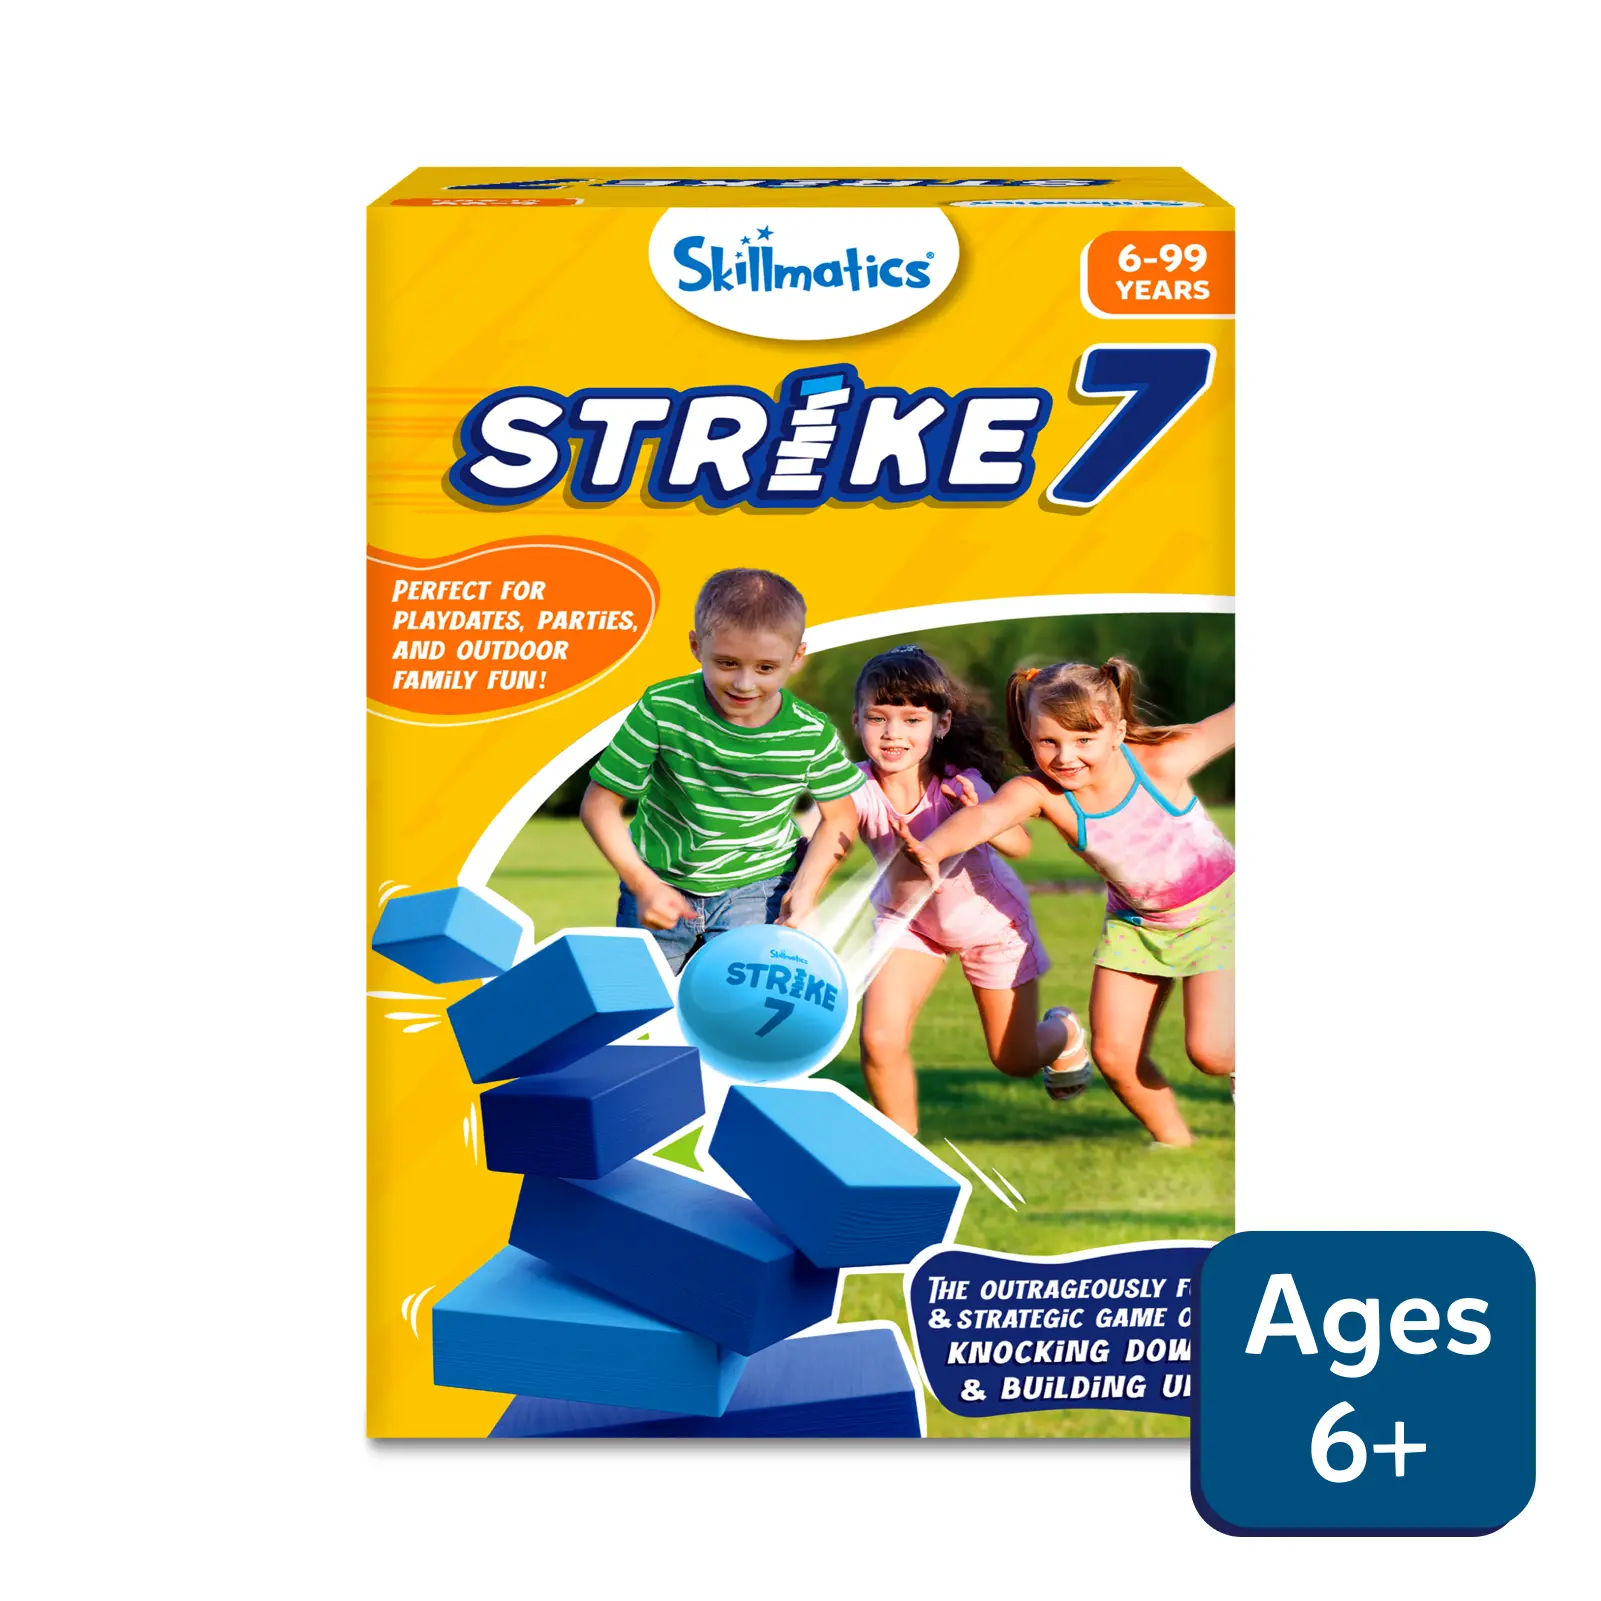 Skillmatics Block Game: Strike 7! | Strategic Game of Knocking Down & Building Up (ages 6+)